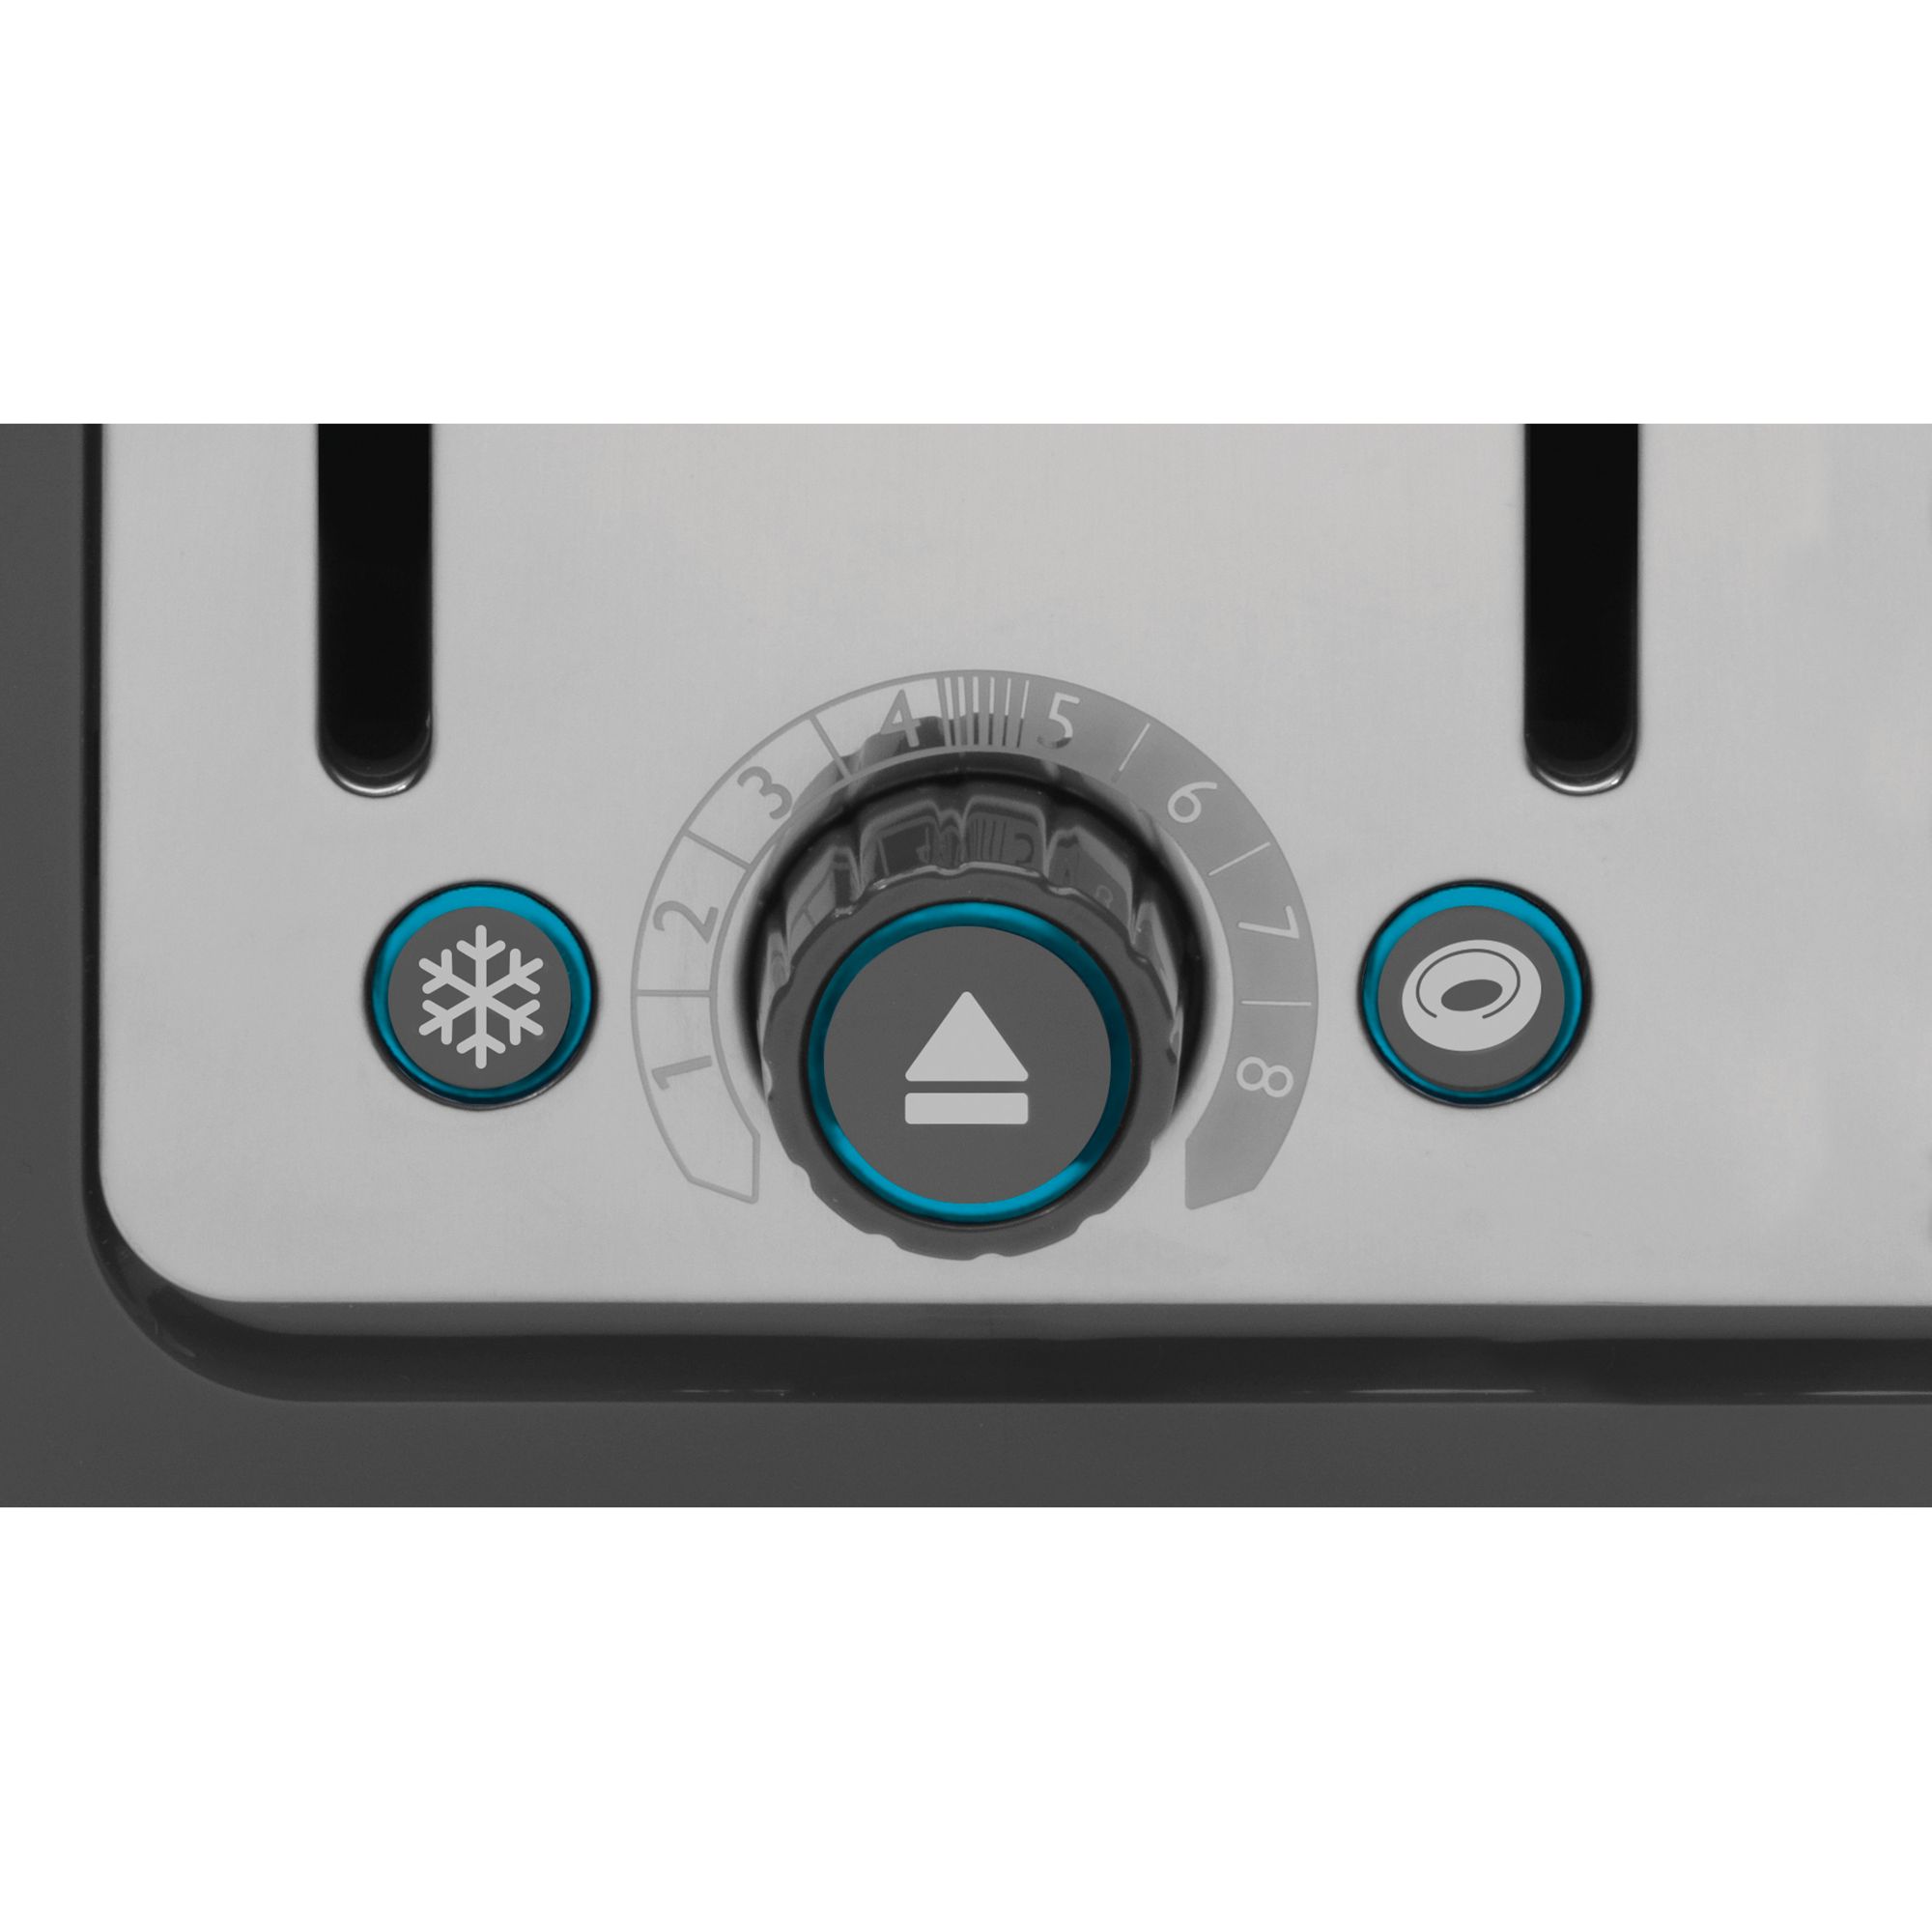 Dualit 40505 Architect 4-Slot Toaster - Stainless Steel with Black Finish  220 VOLTS NOT FOR USA